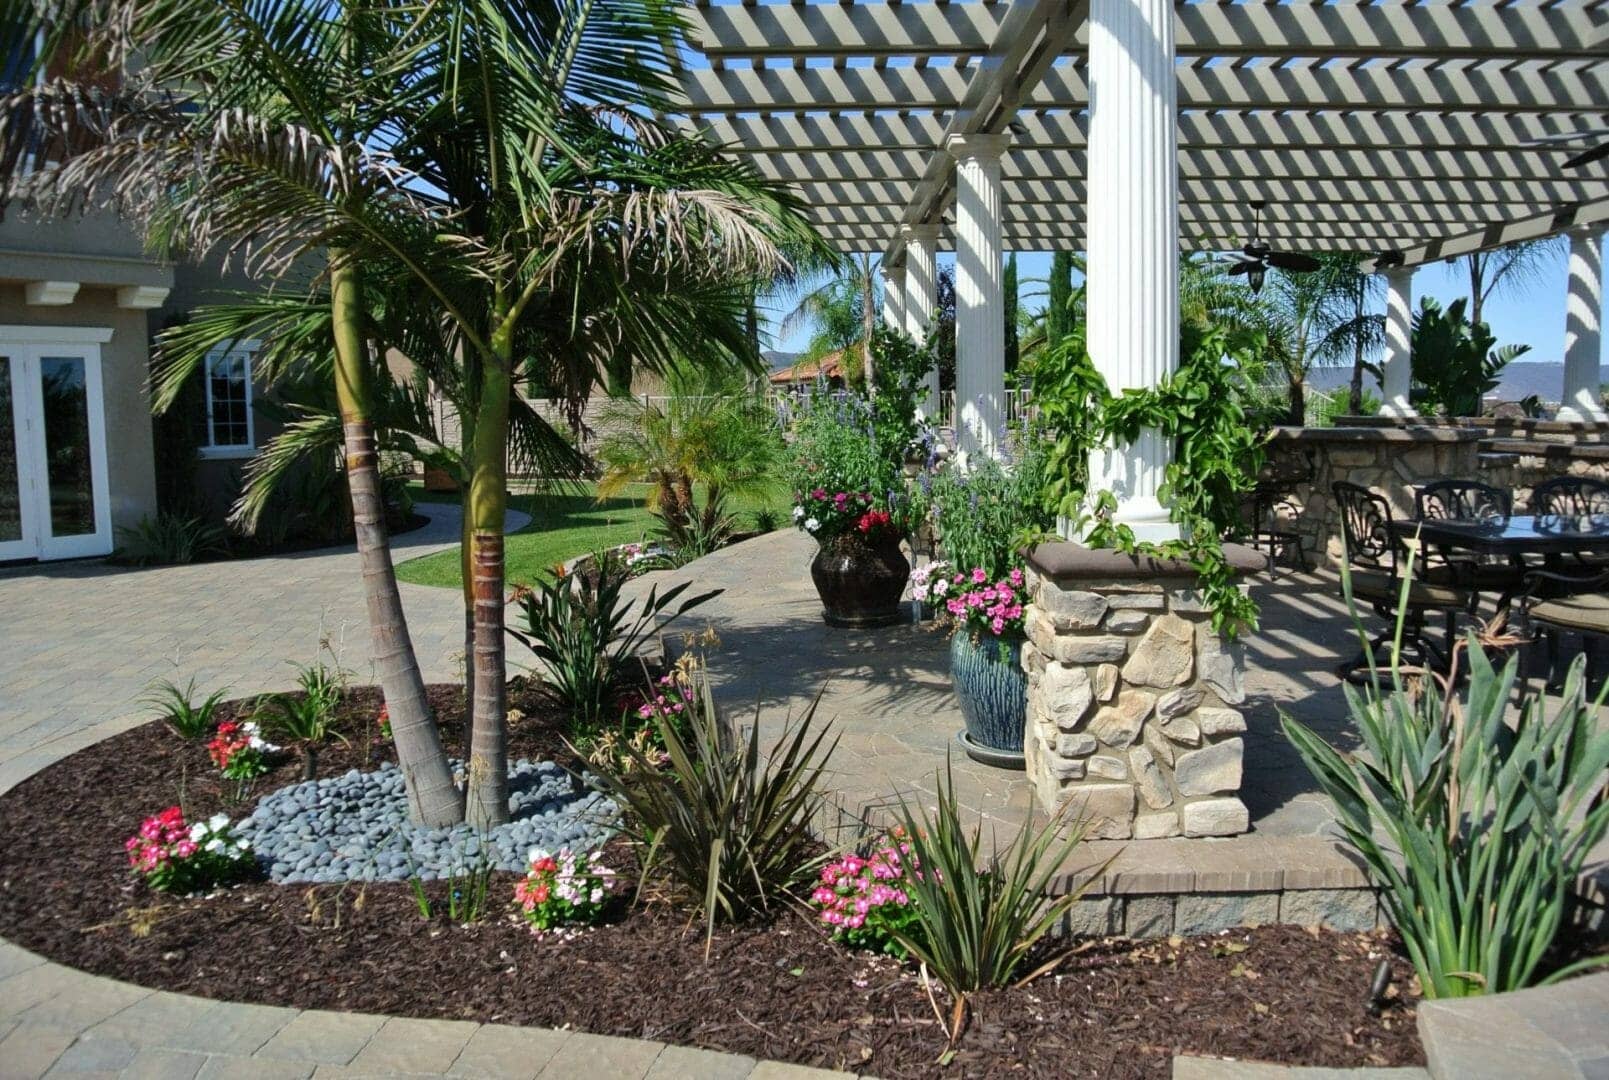 How to save valuable resources with your landscaping